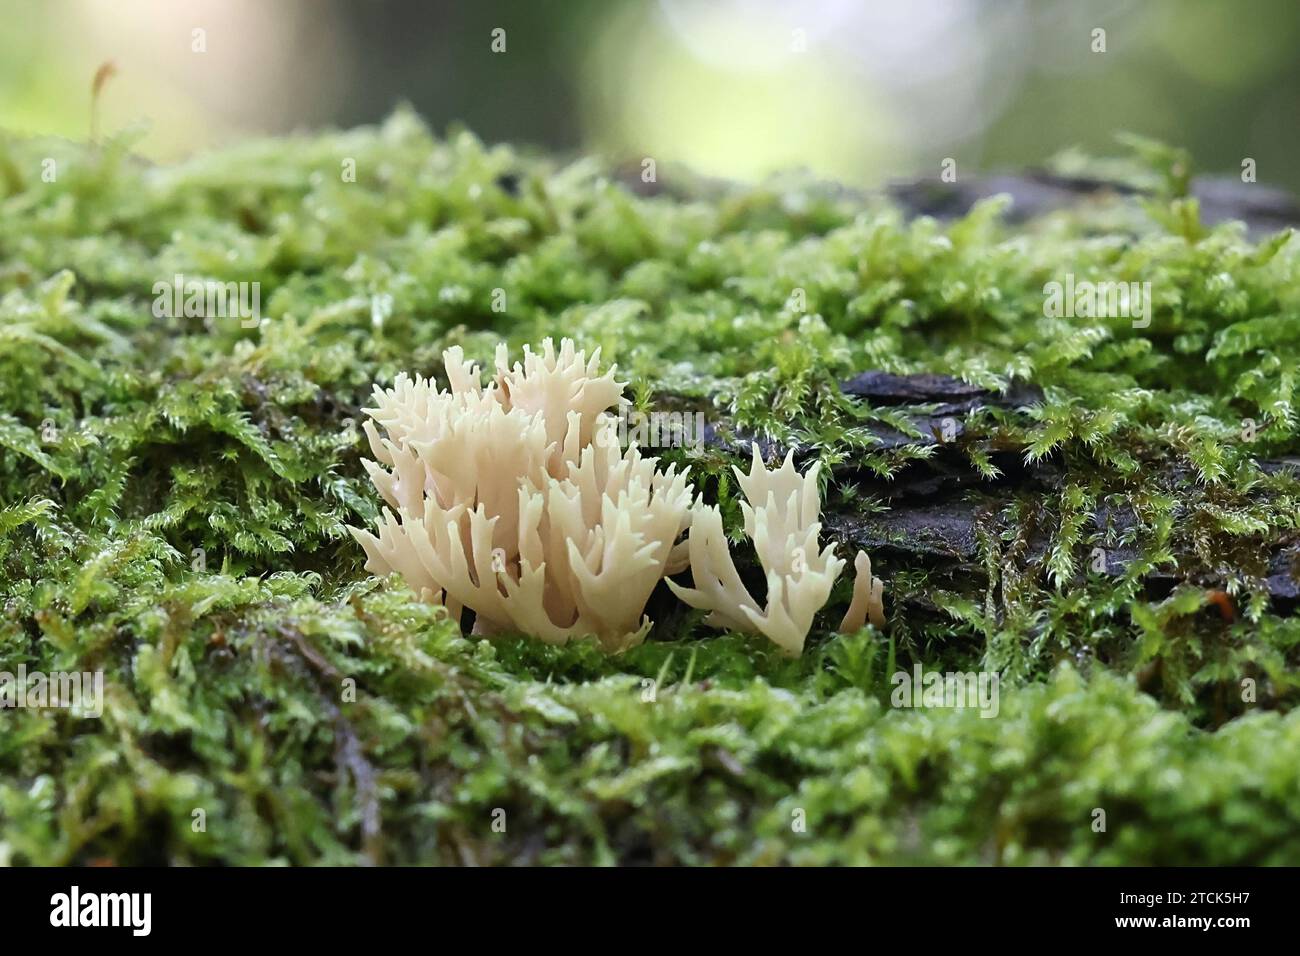 Lentaria byssiseda, a coral fungus growing on oak trunk, no common English name Stock Photo